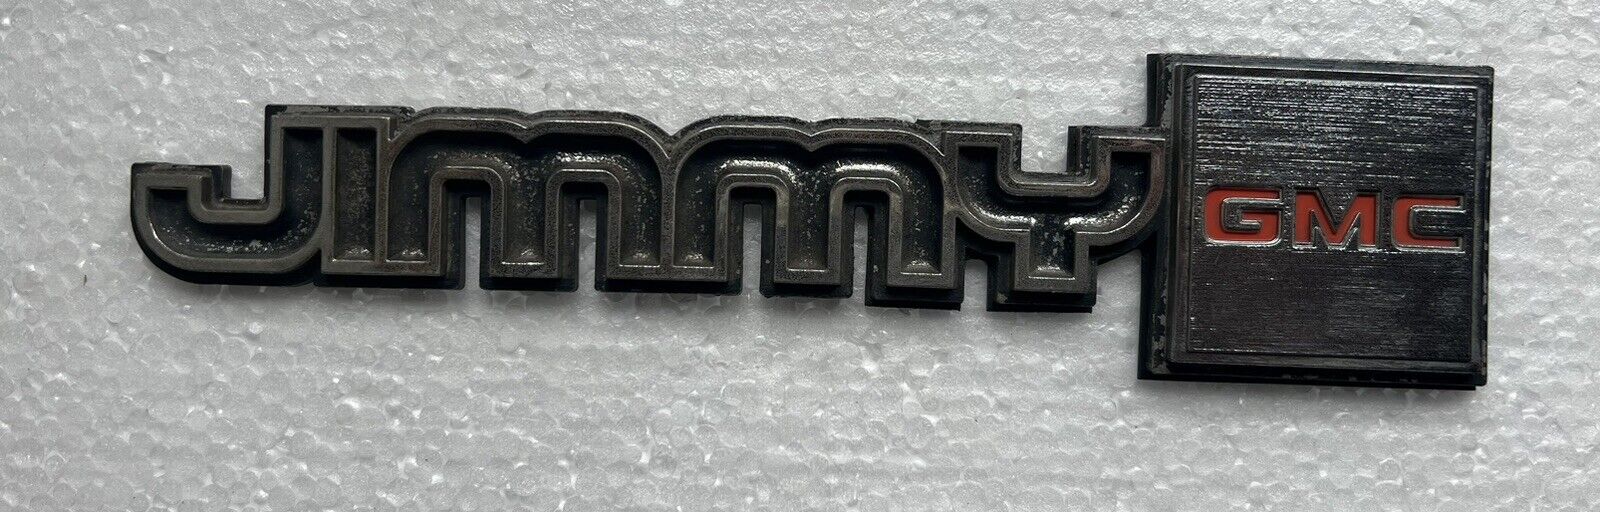 GMC JIMMY FRONT FENDER EMBLEM APPROX 9 1/4” - No Mounting Pins